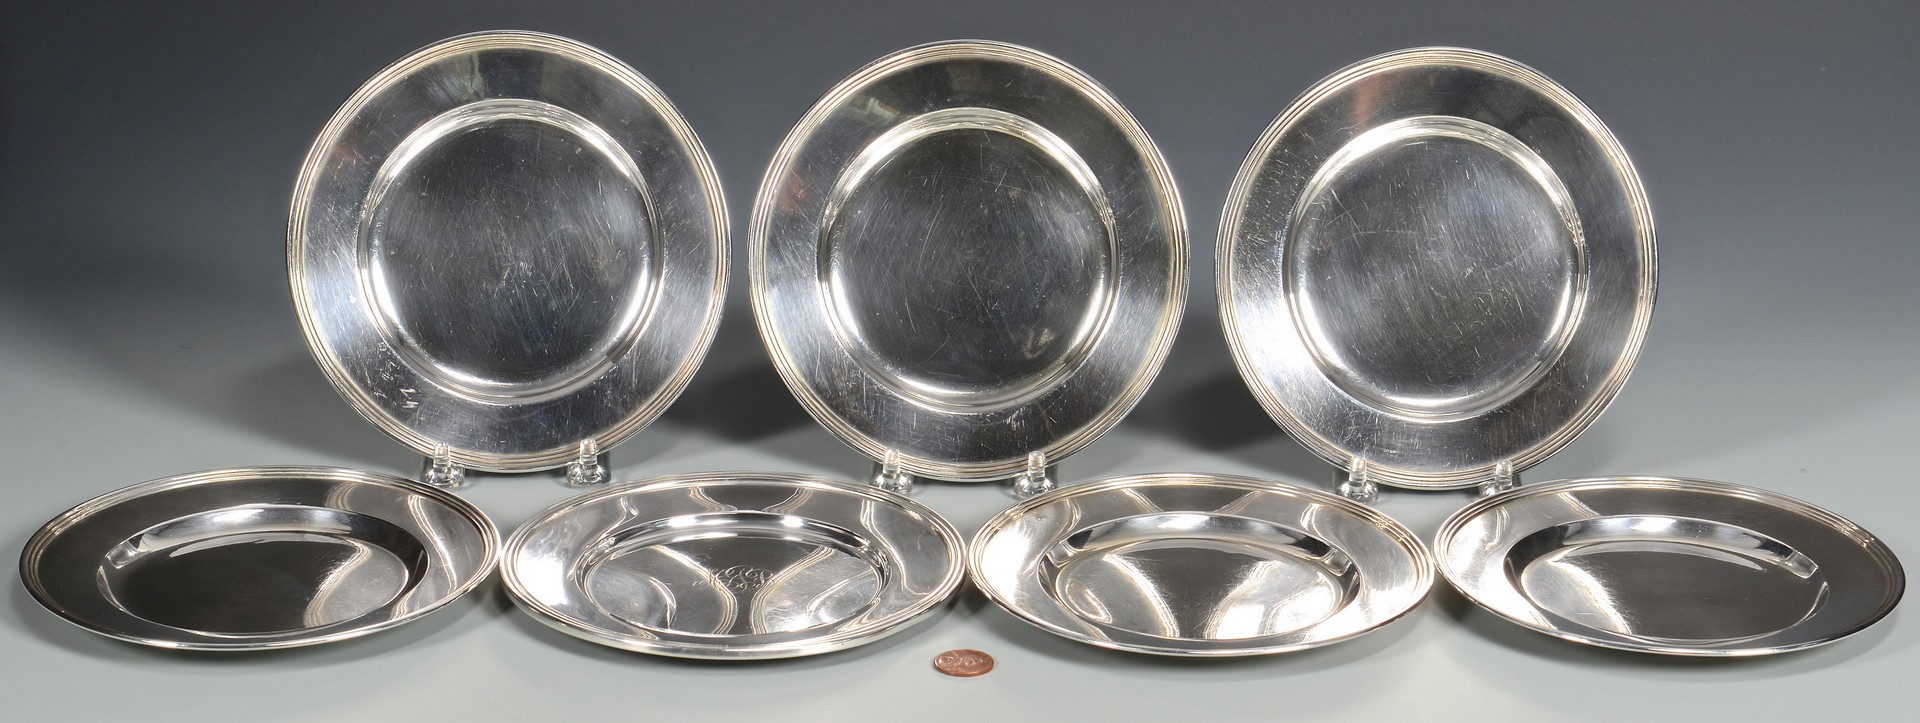 Lot 816: 7 Sterling Bread and Butter Plates